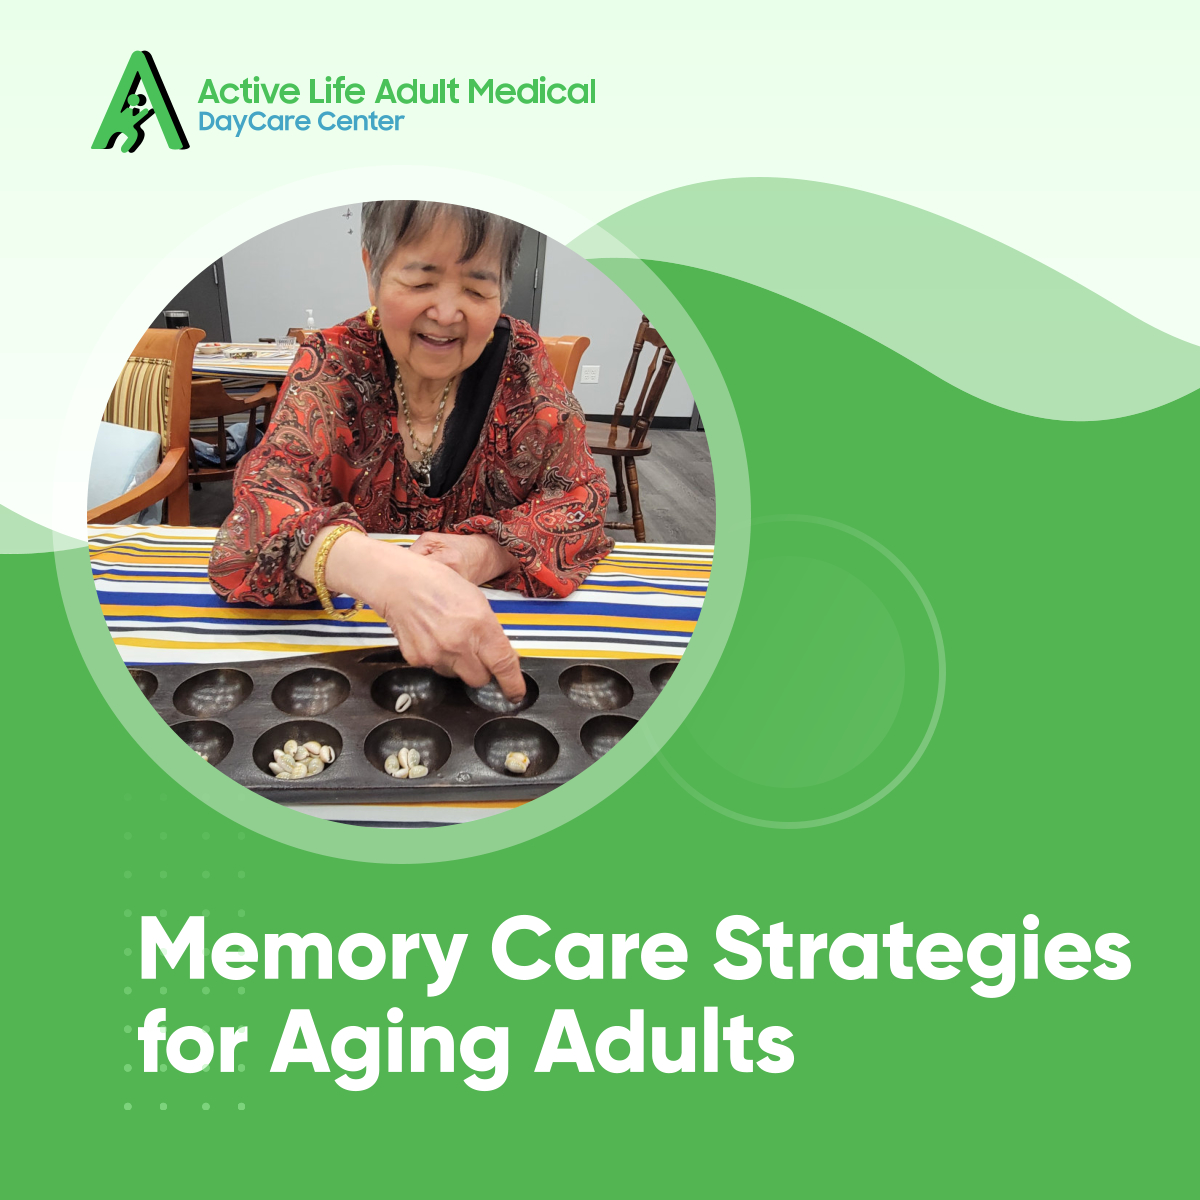 As we age, it's crucial to prioritize memory care. Stay mentally sharp with strategies like brain exercises, puzzles, and memory games. 

Read more:
facebook.com/permalink.php?…

#MemoryCare #AgingAdults #AdultDayCare #EssexMD